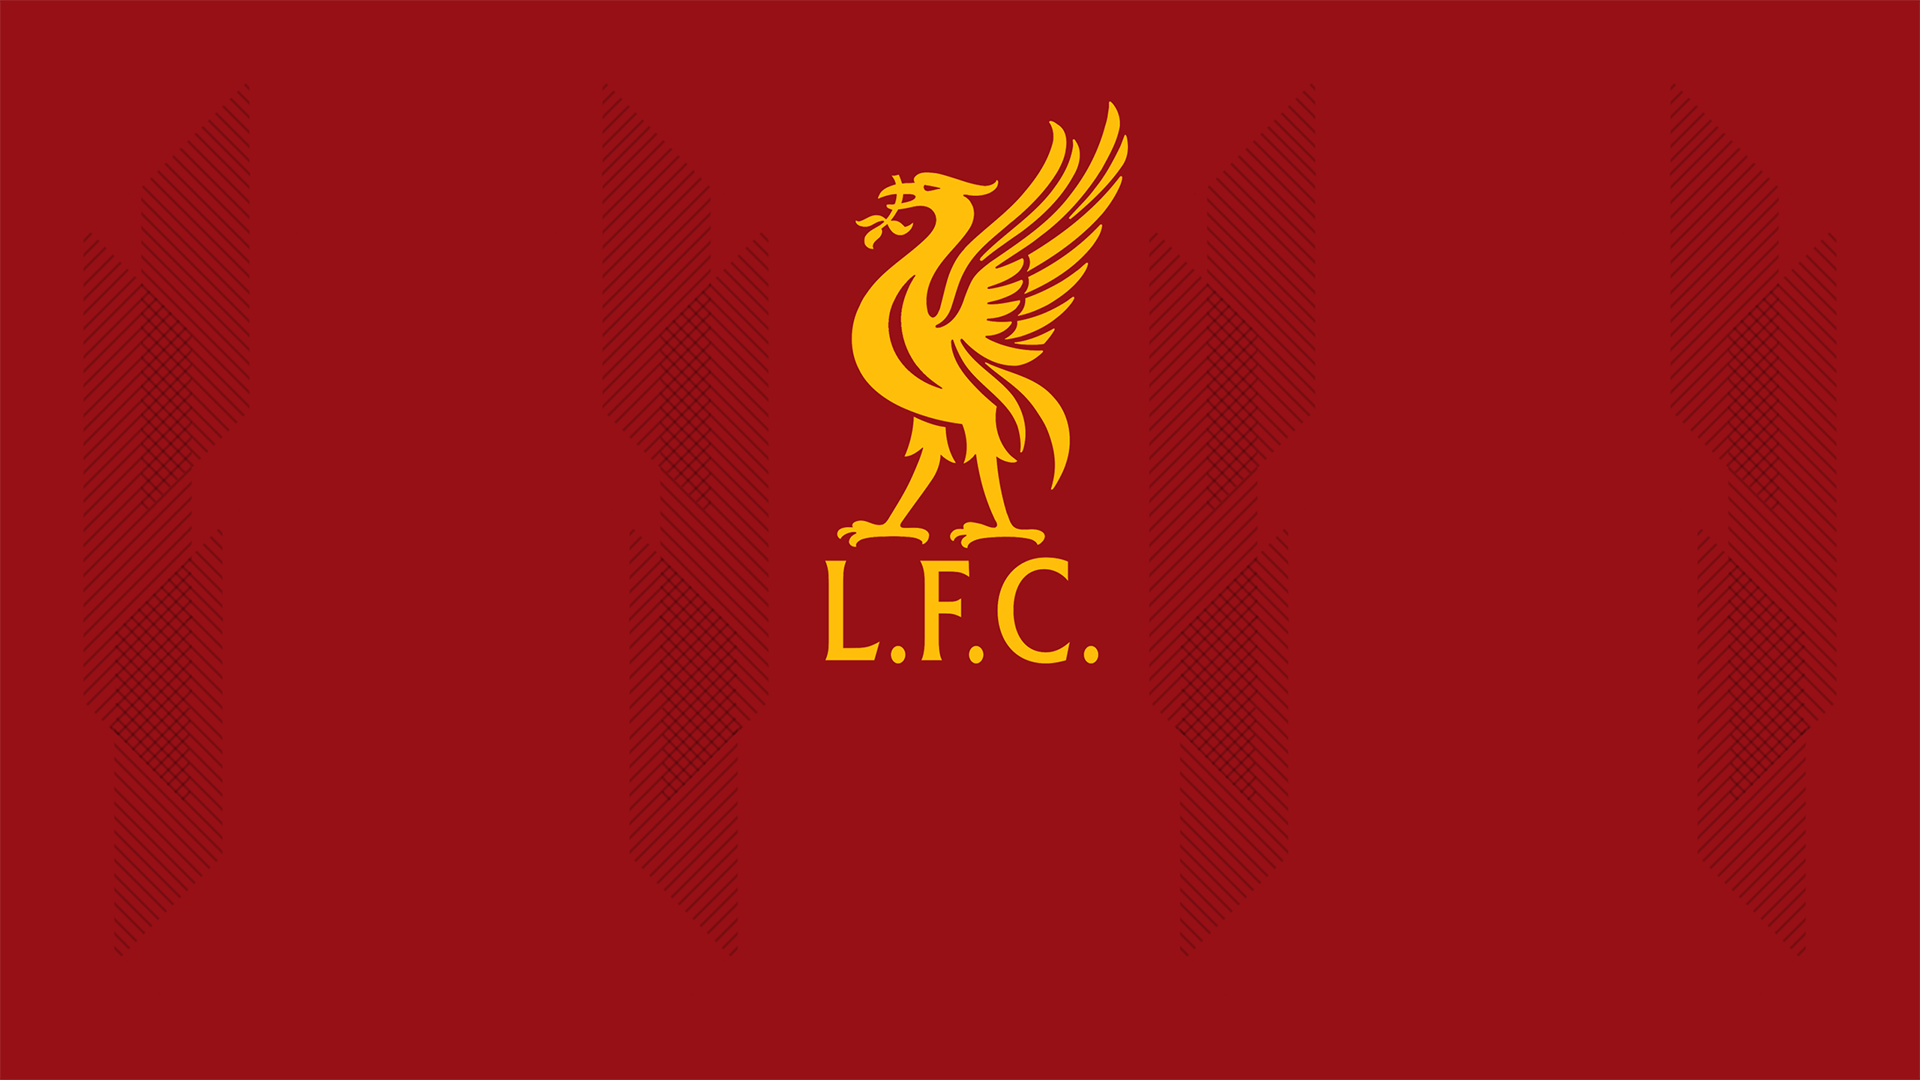 Made a desktop wallpaper inspired by the new home kit!